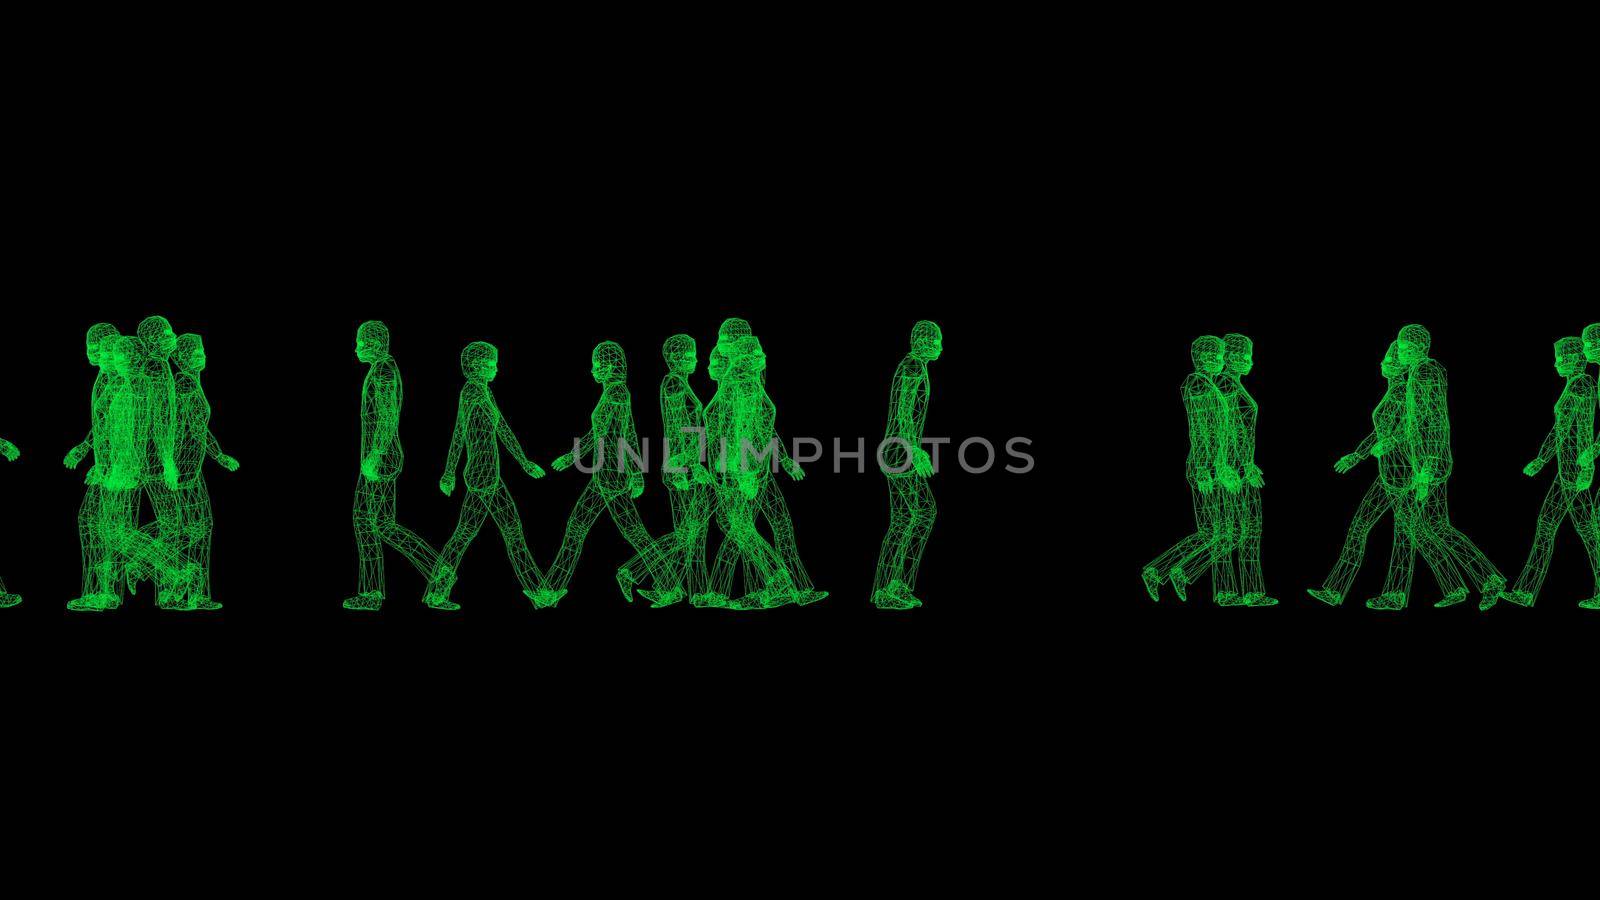 Green wire people Binary code crowd man and woman walk on black back 3d render